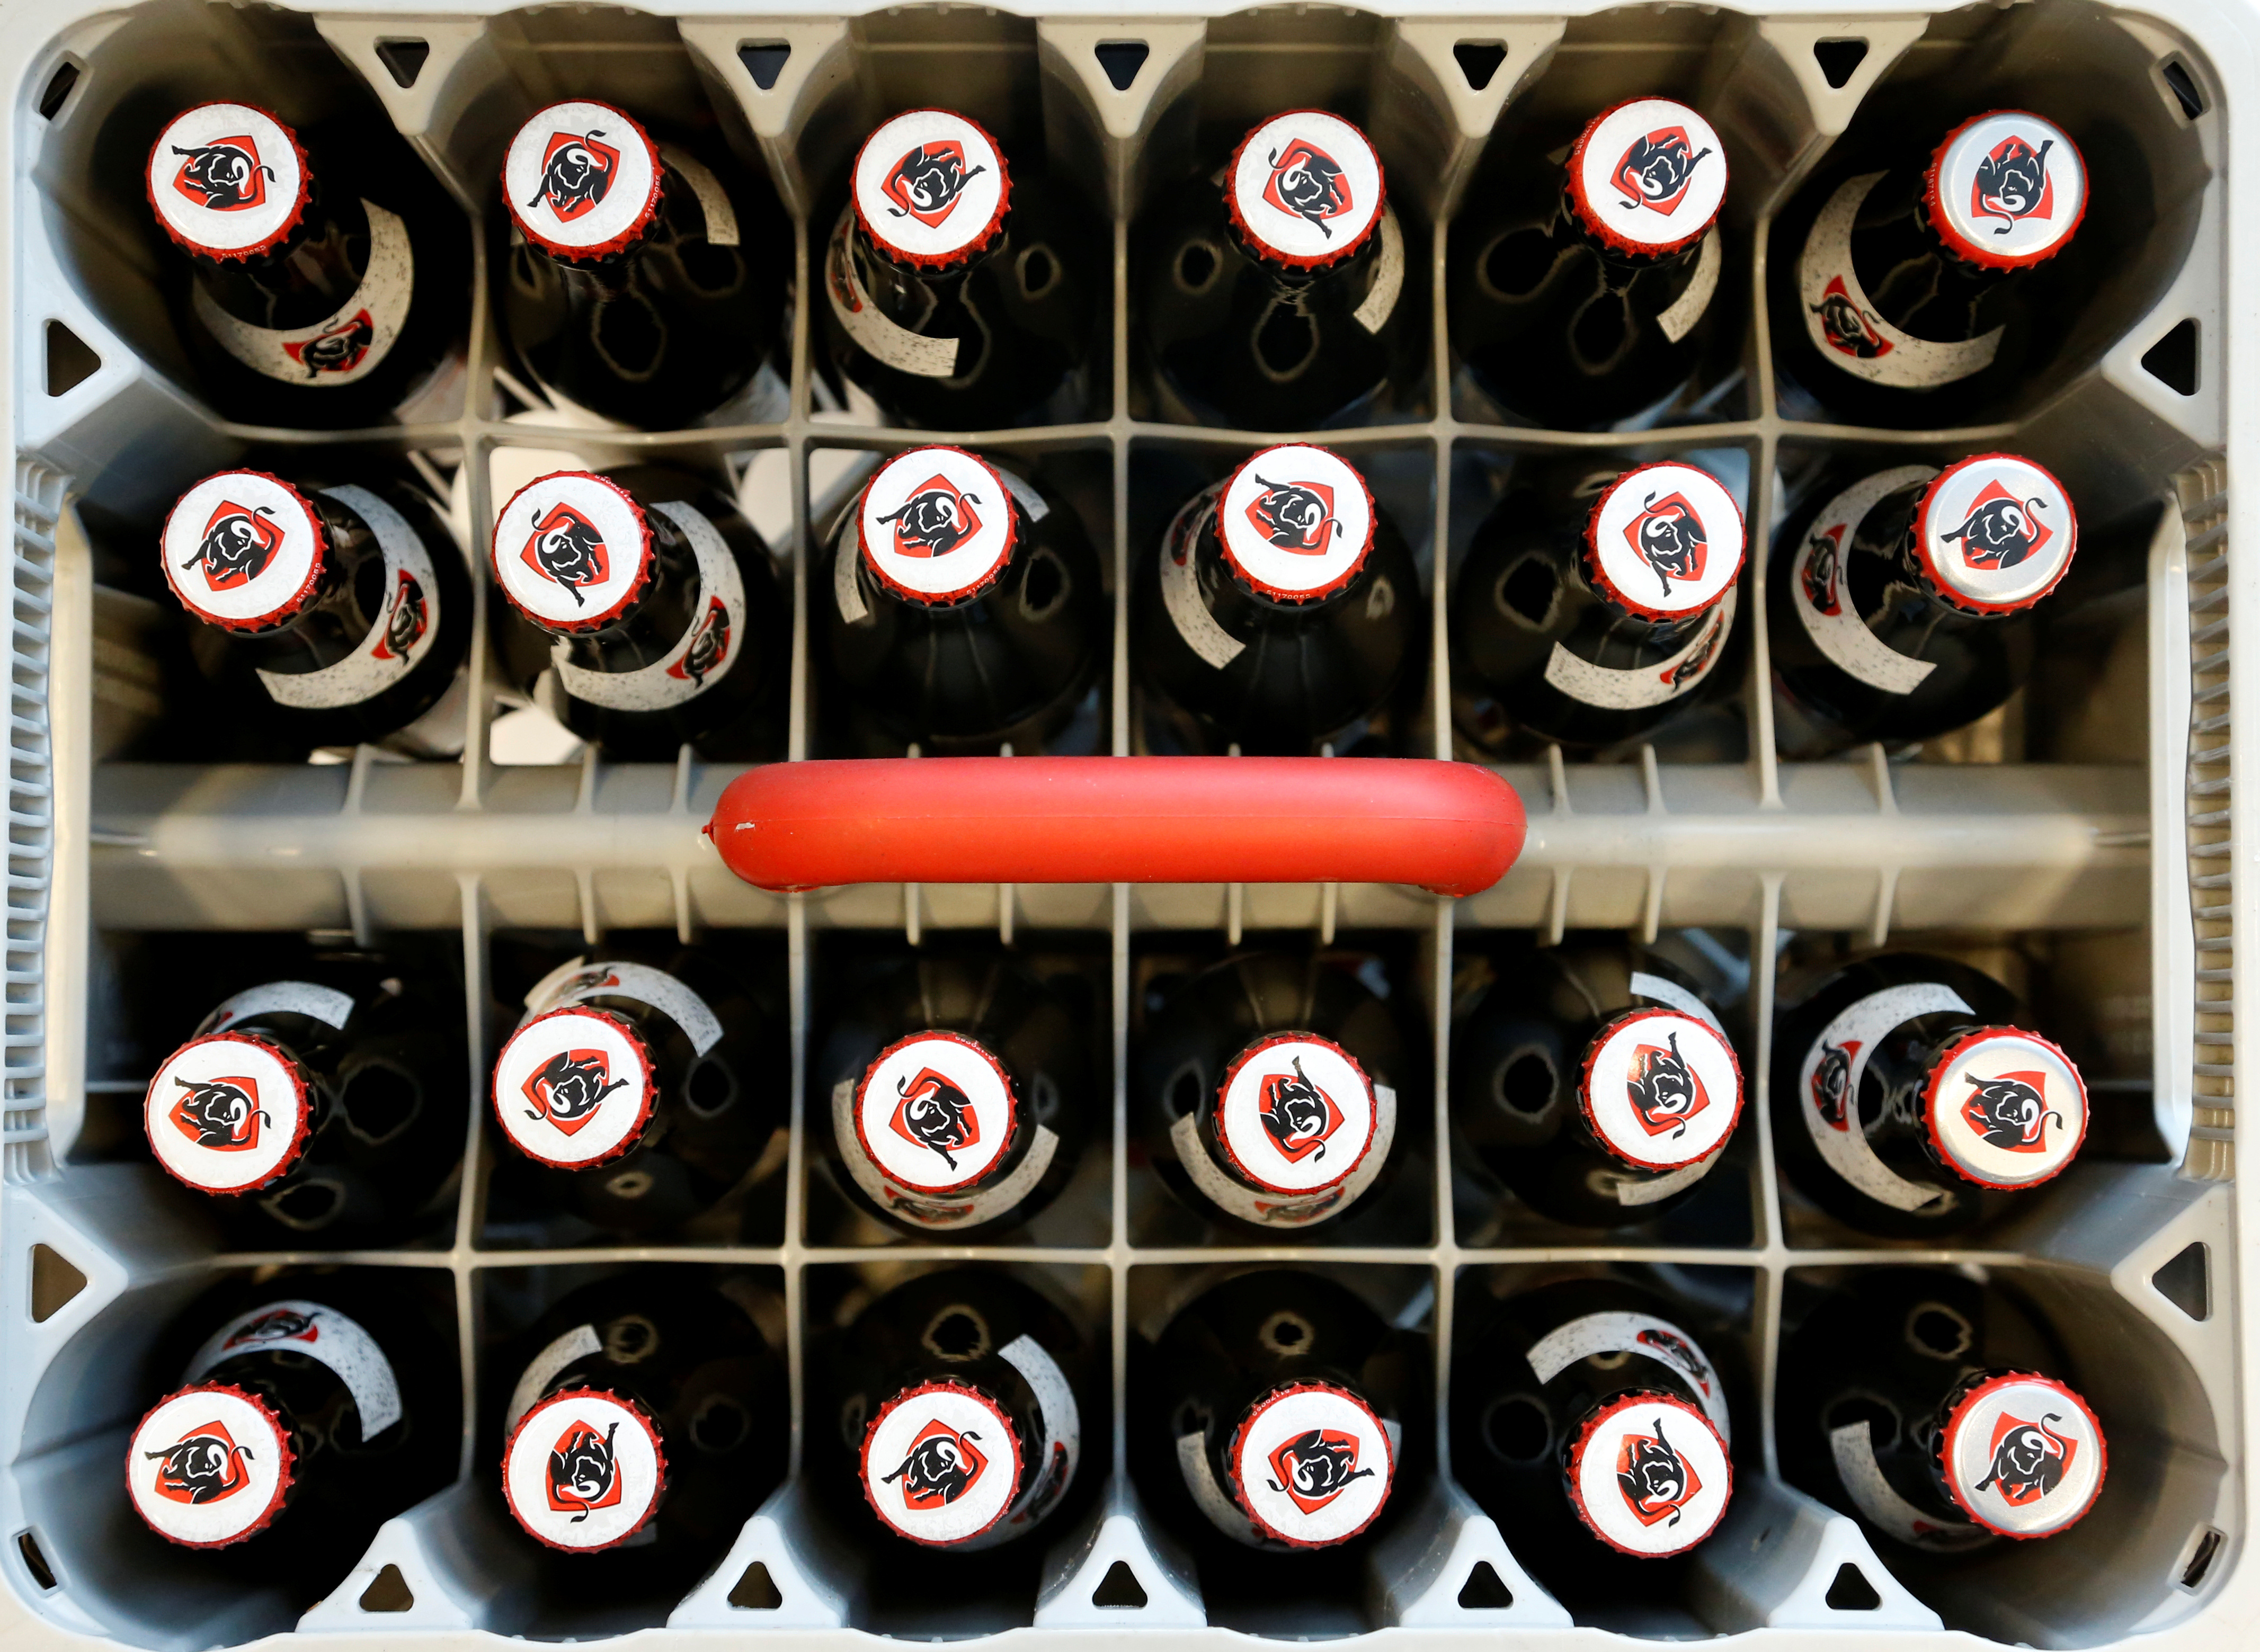 A rack of non-alcoholic Jupiler beer bottles is seen at the headquarters of Anheuser-Busch InBev in Leuven